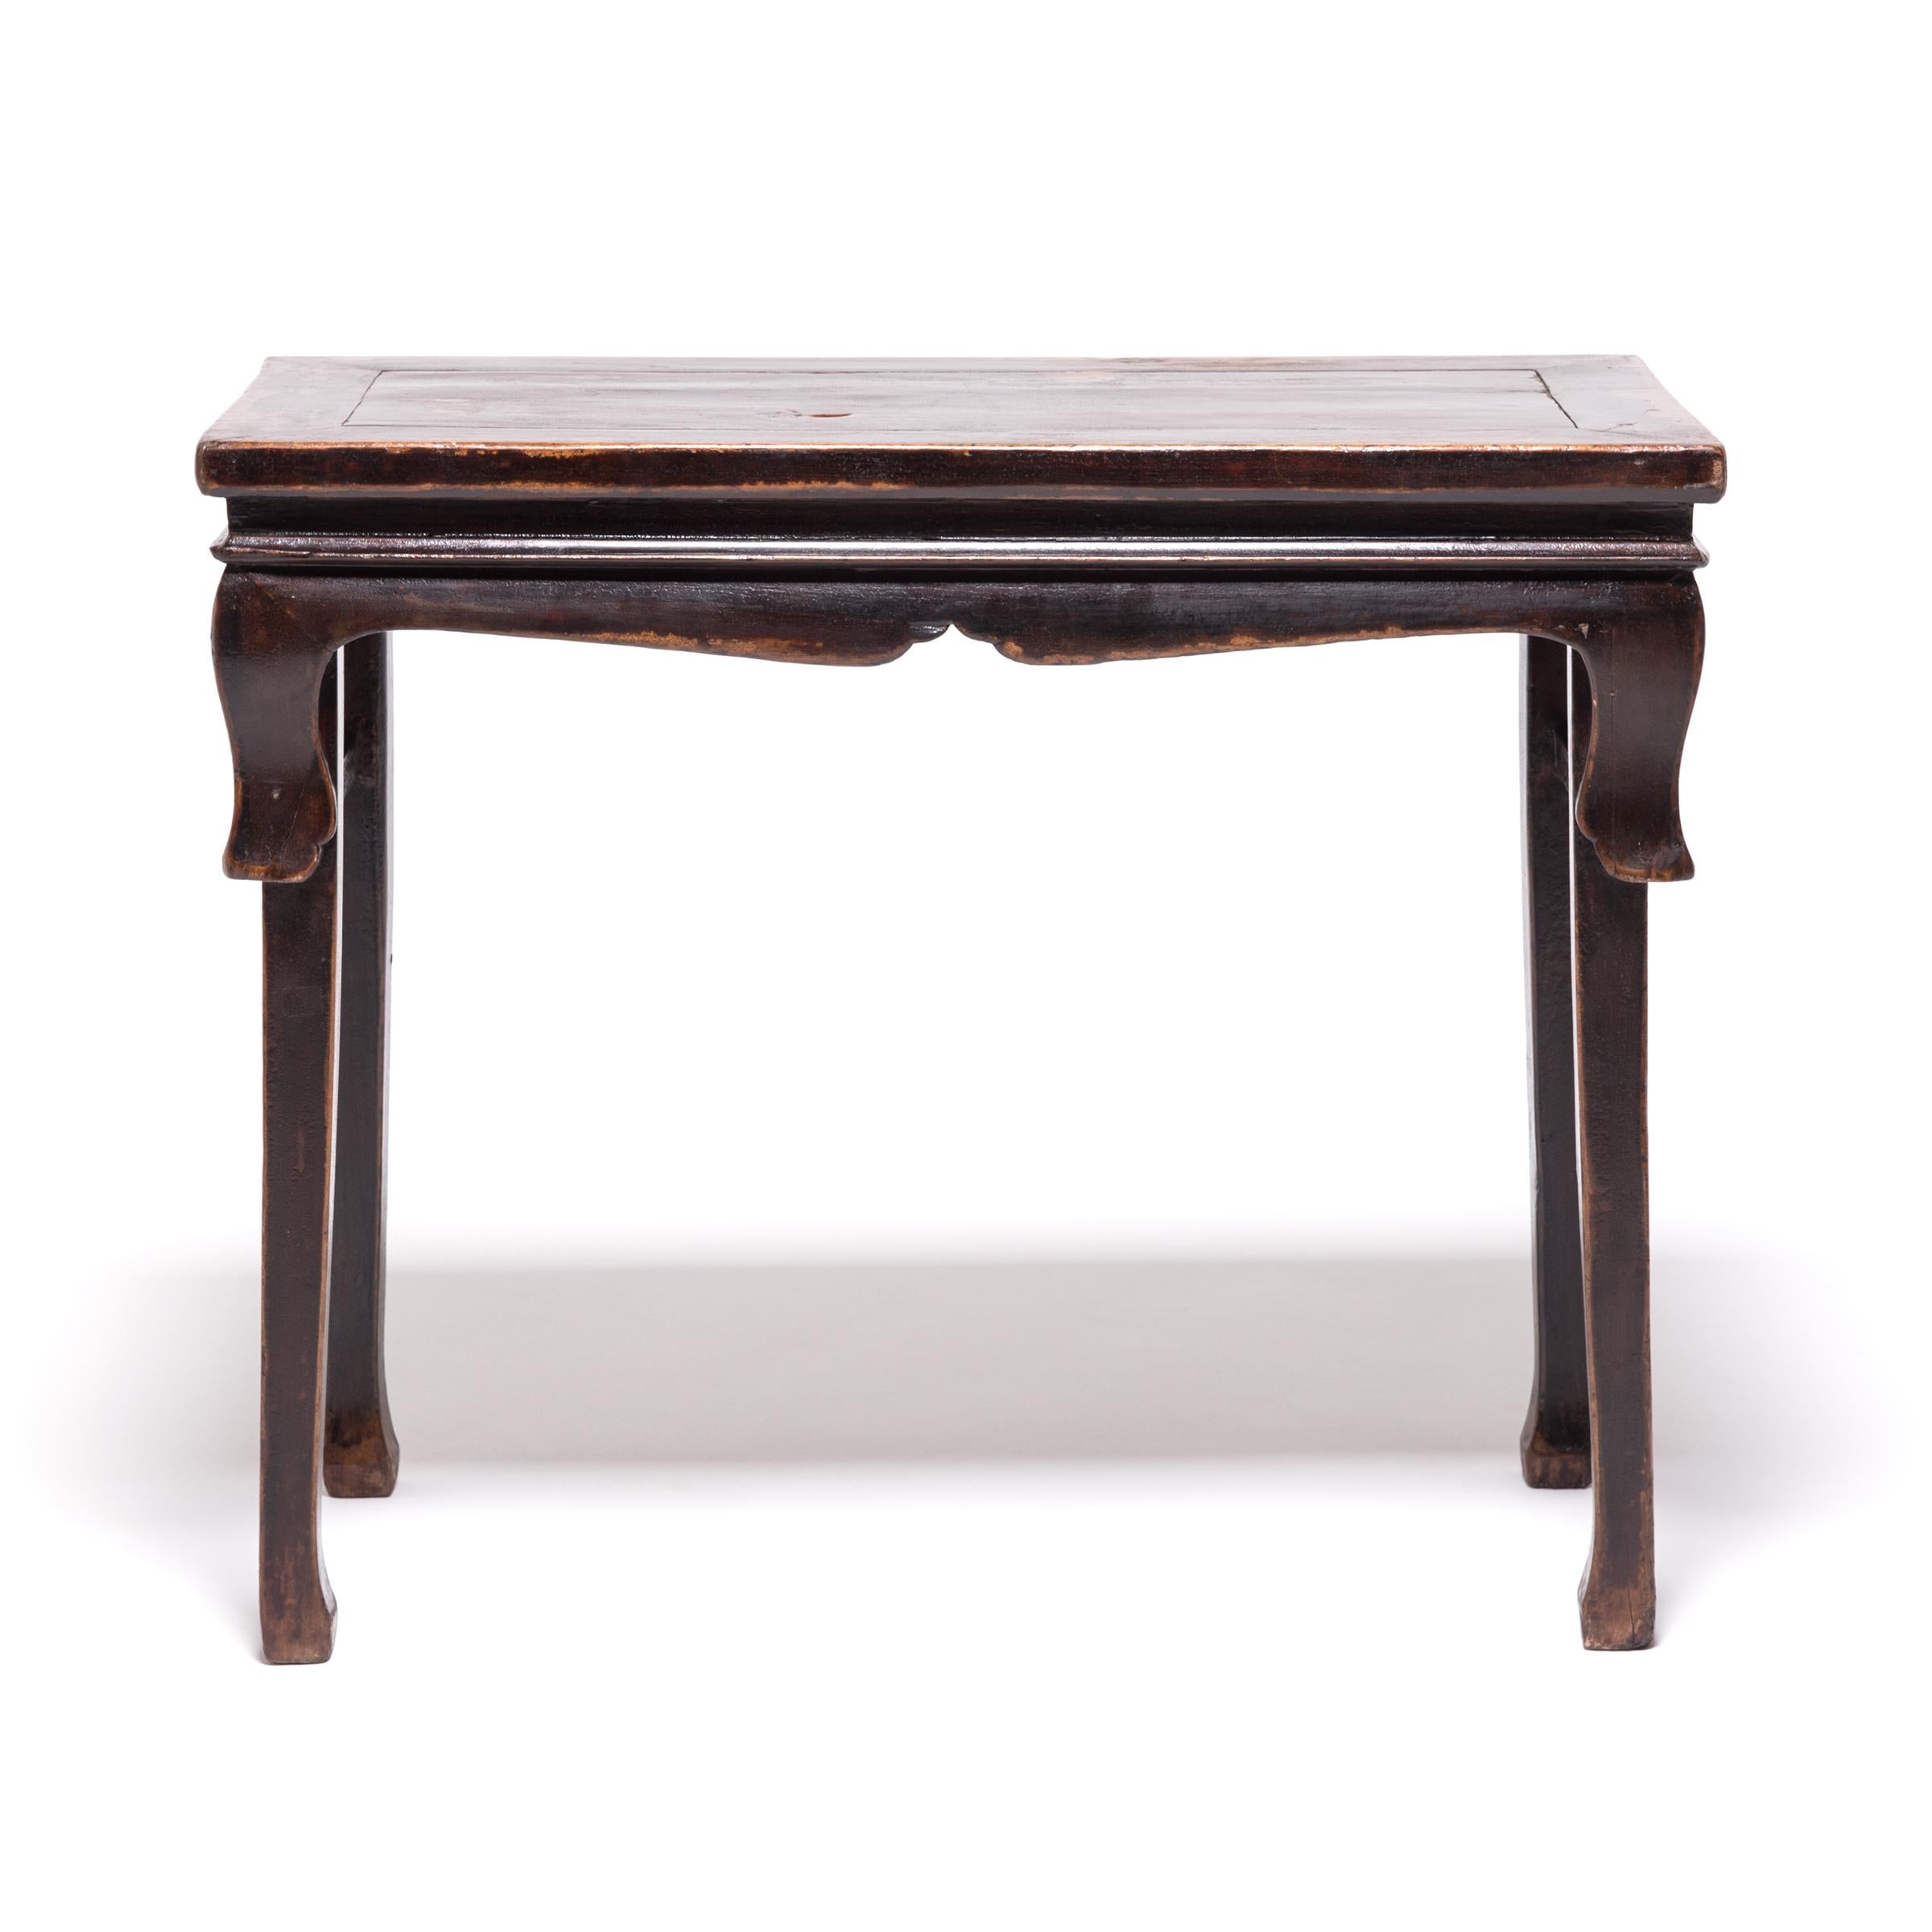 Lacquered Adjustable Chinese Console Table, circa 1850 For Sale